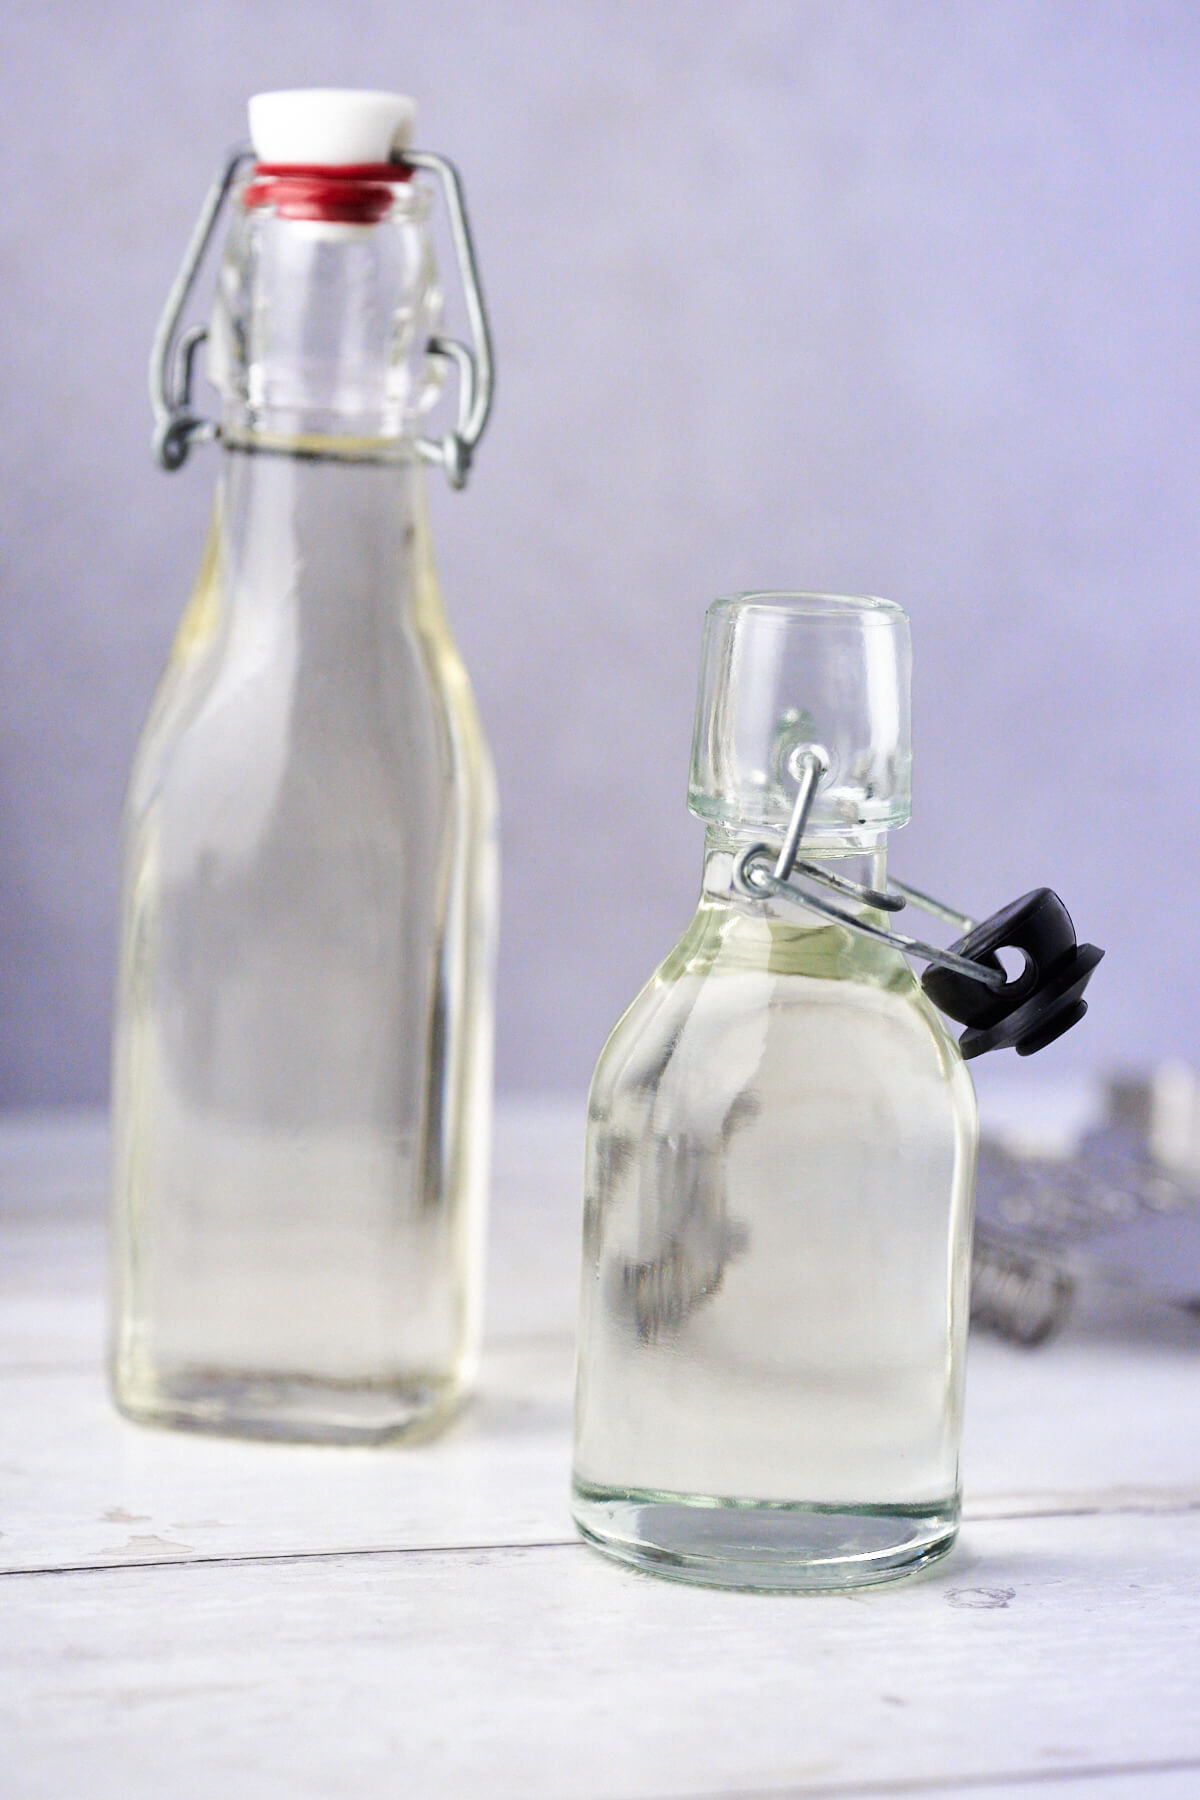 Bottles of homemade simple syrup for drinks